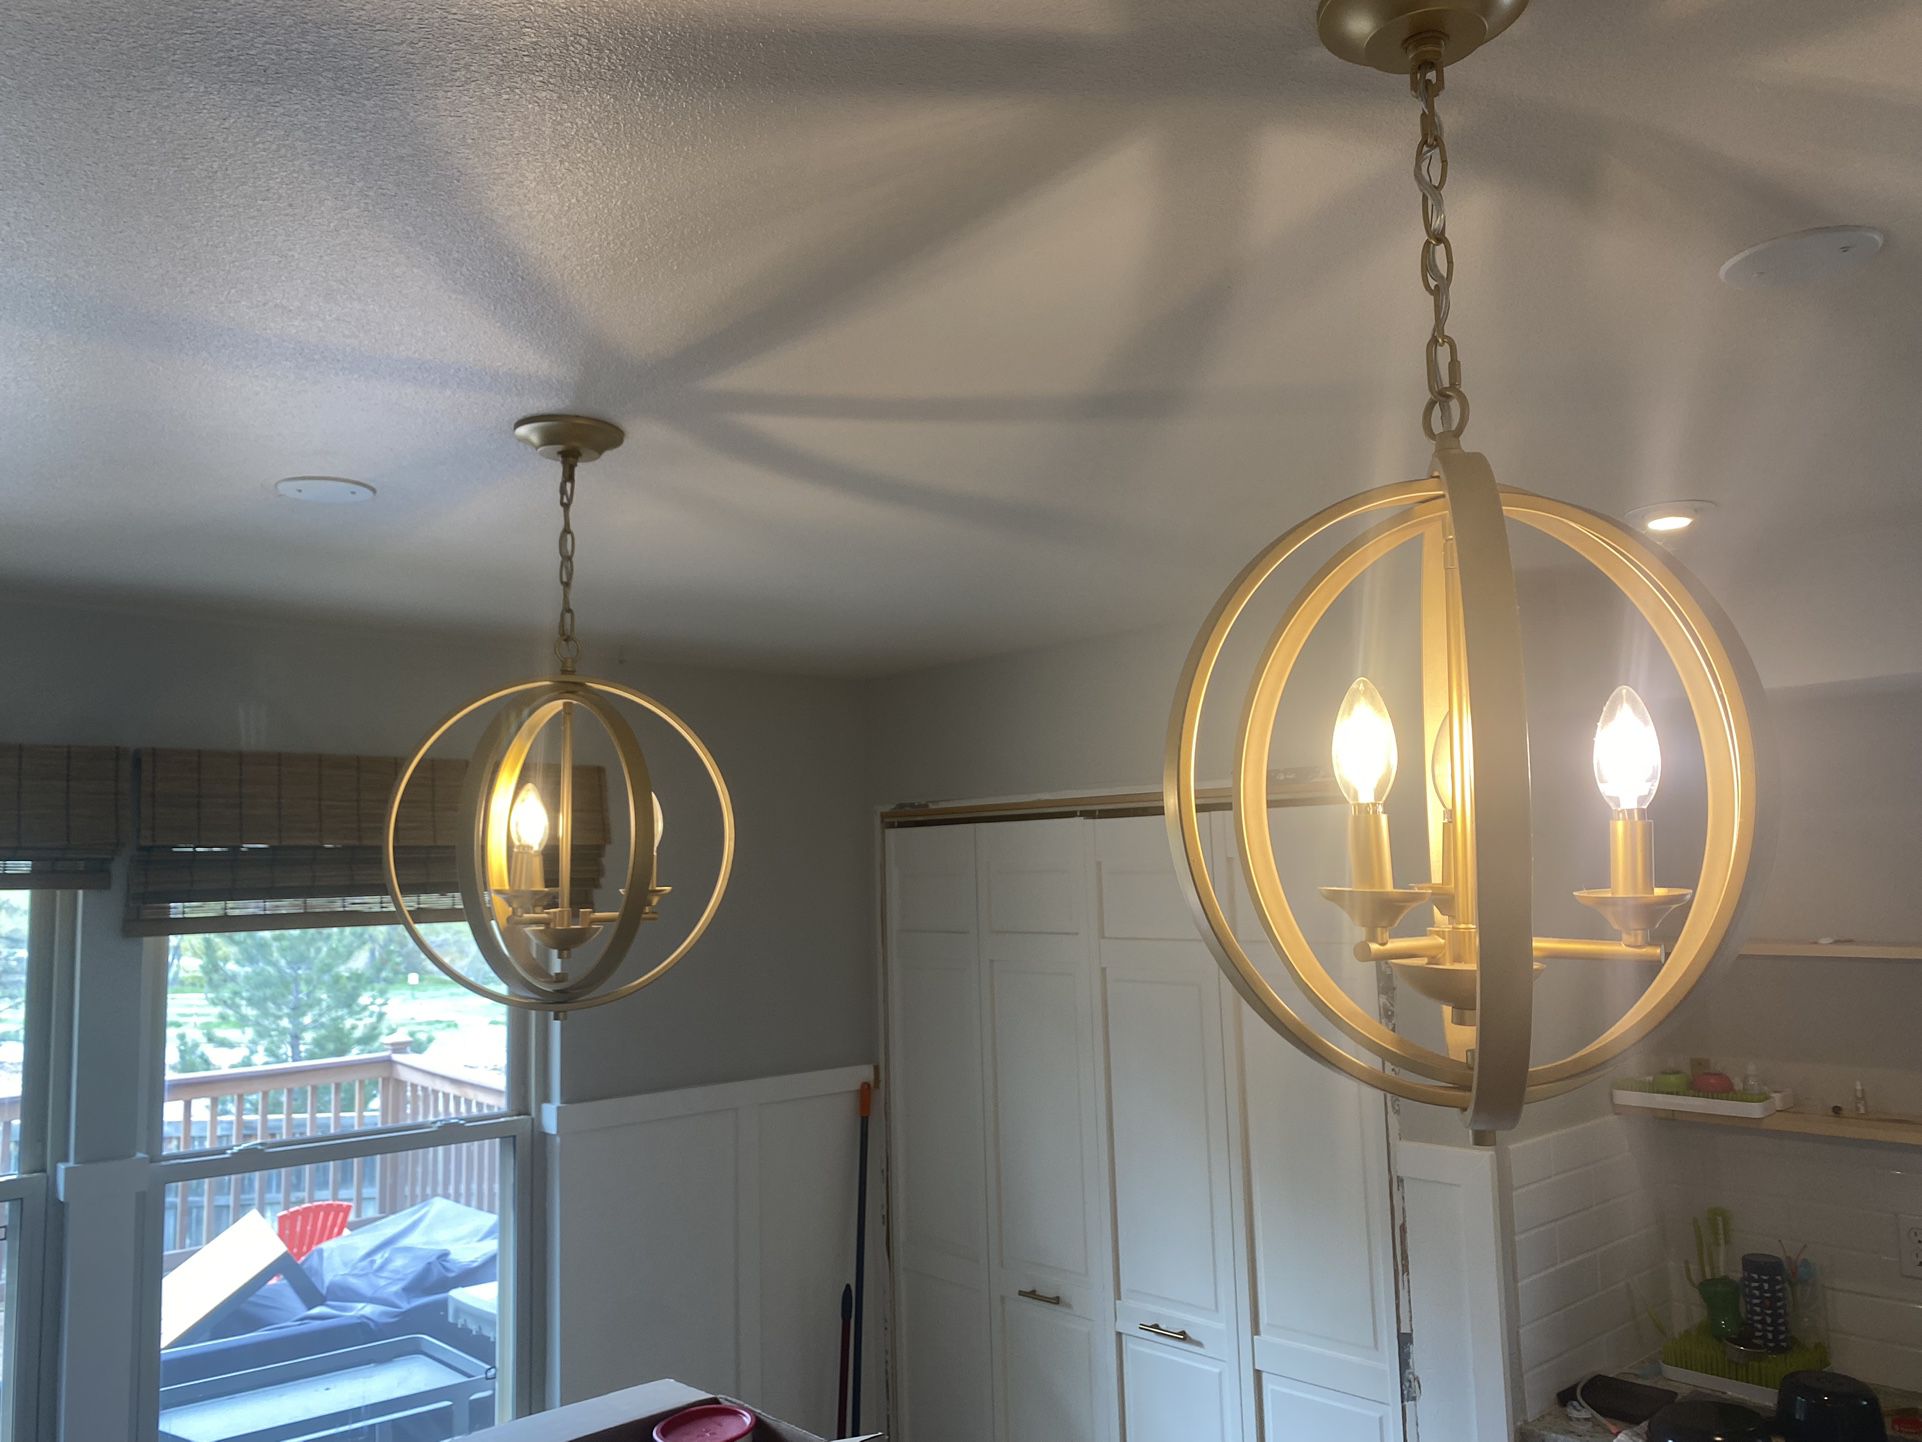 Two Gold Chandeliers